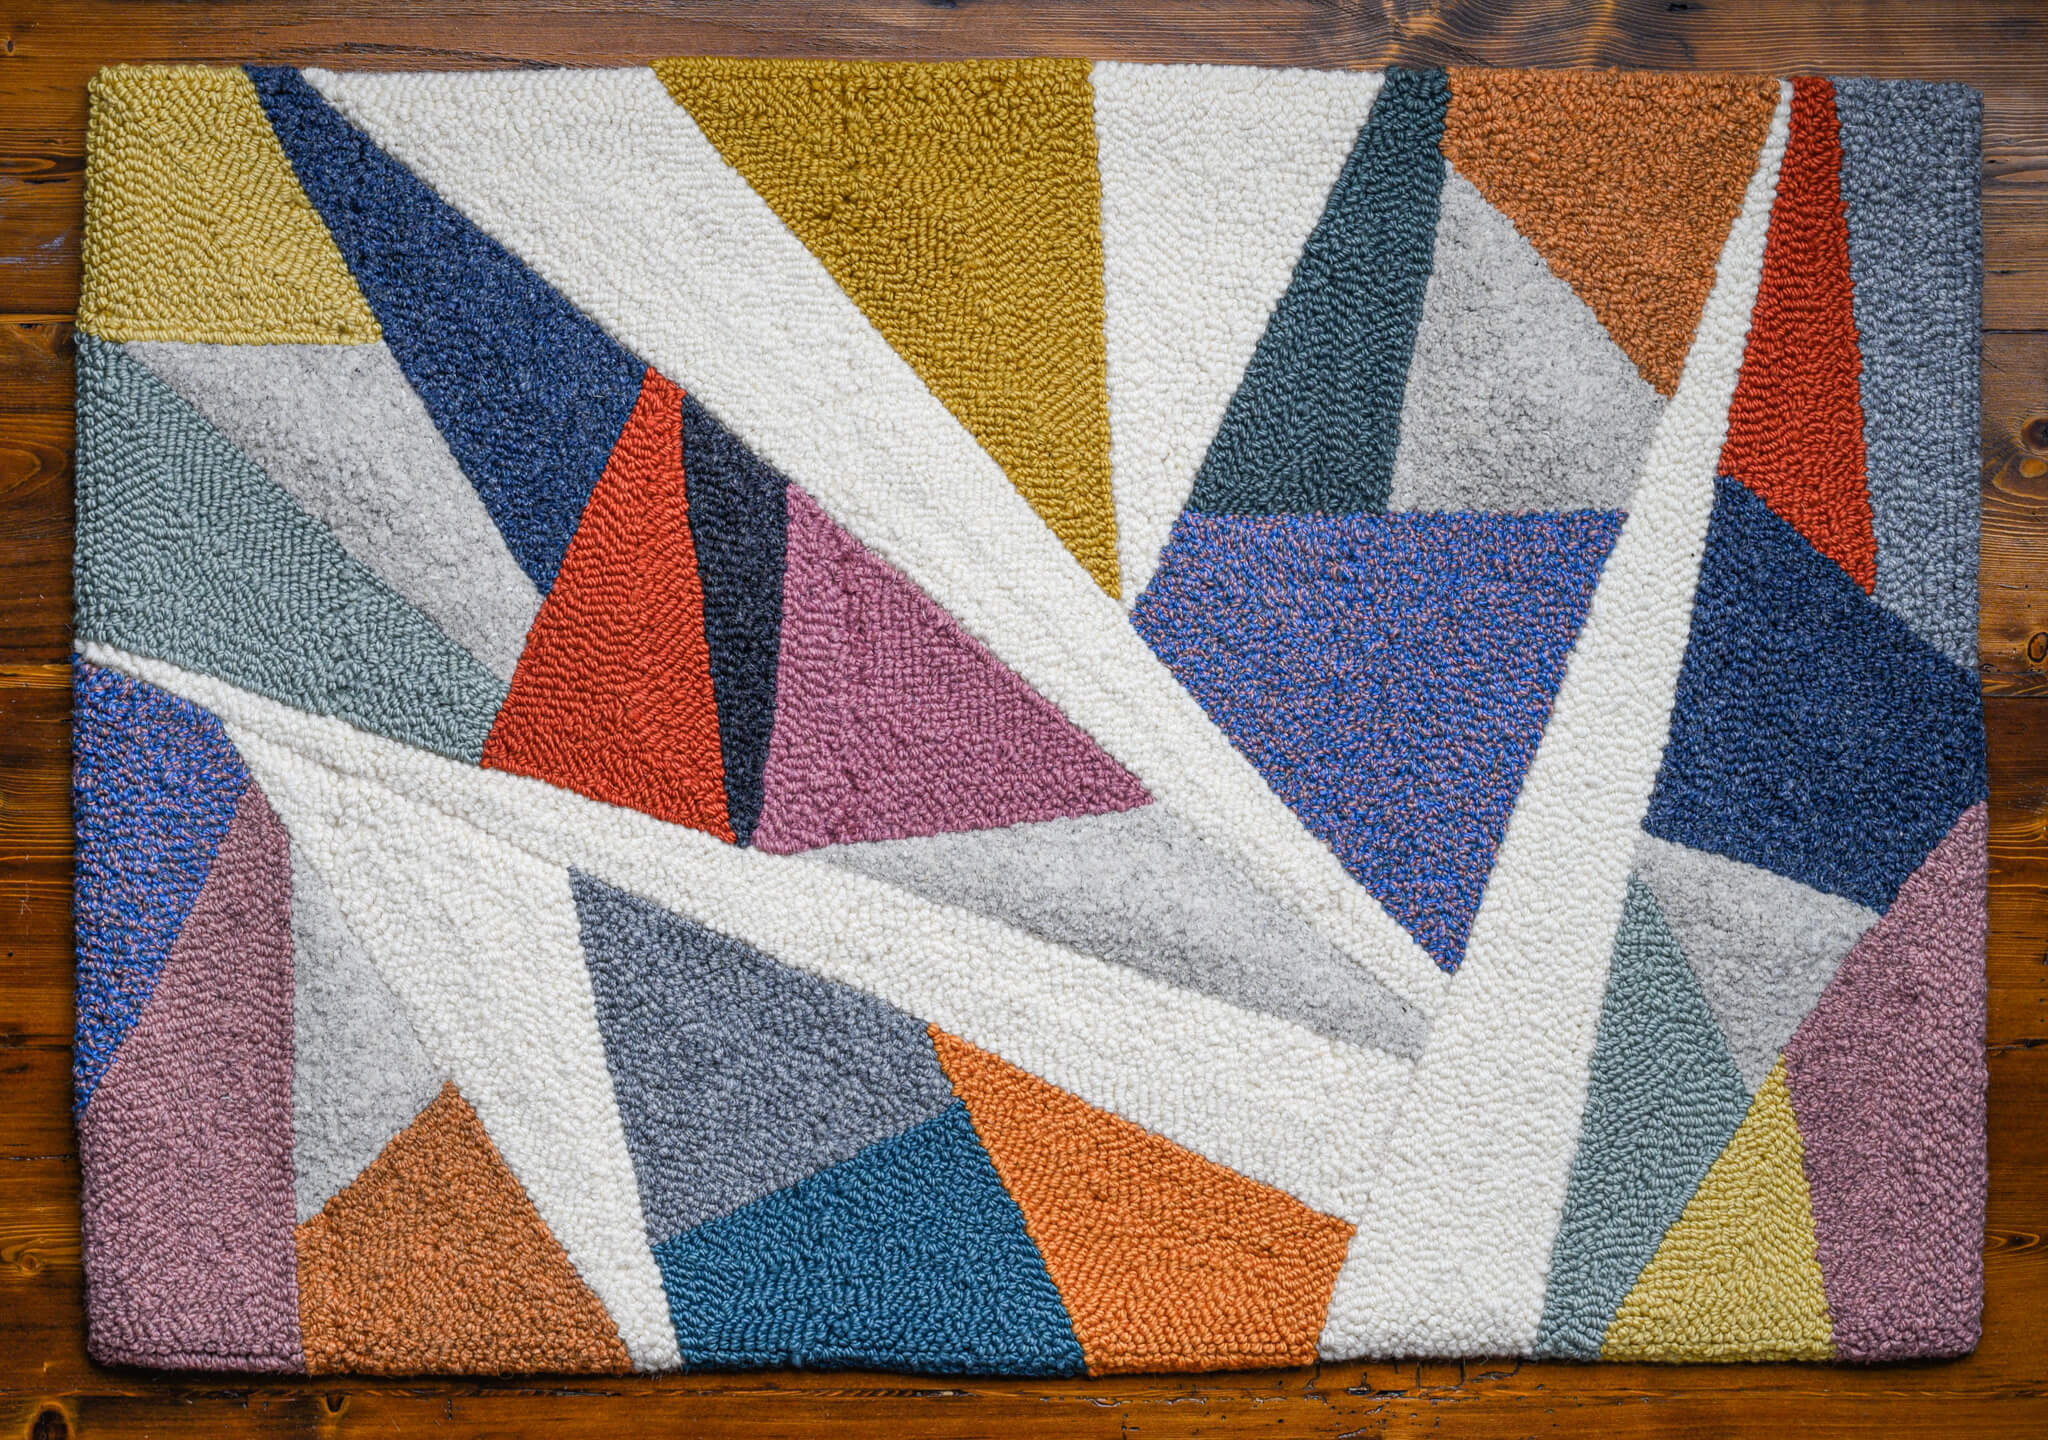 Rug for Oxford certification